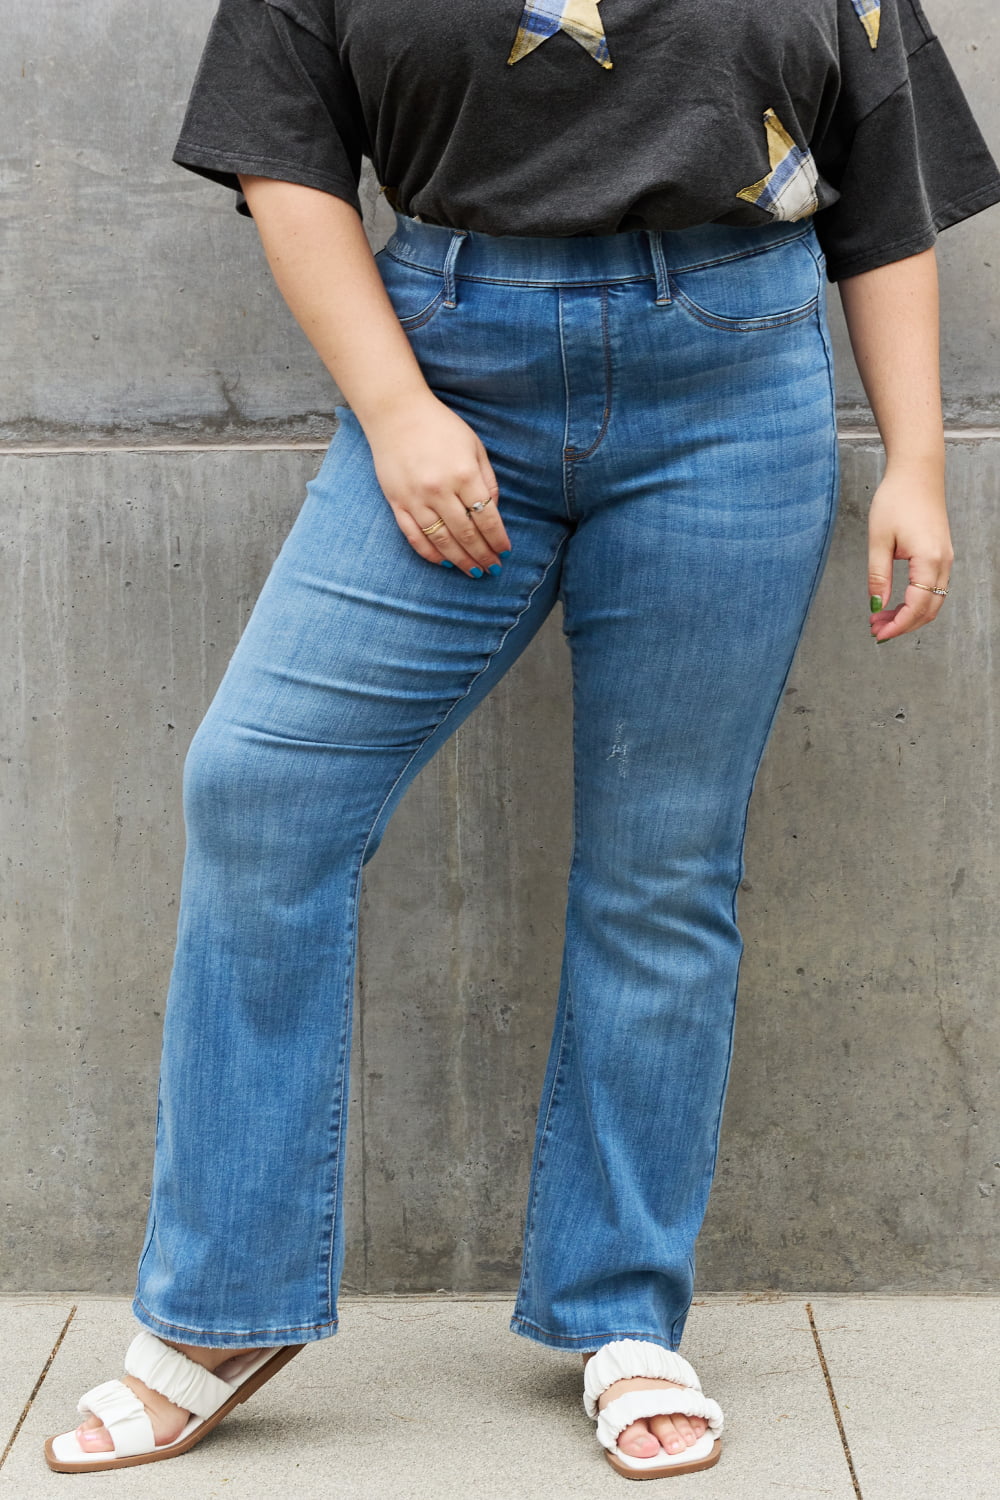 Plus Size, Judy Blue, High Waist Slim Bootcut Easy Pull On Jeans Style 88520